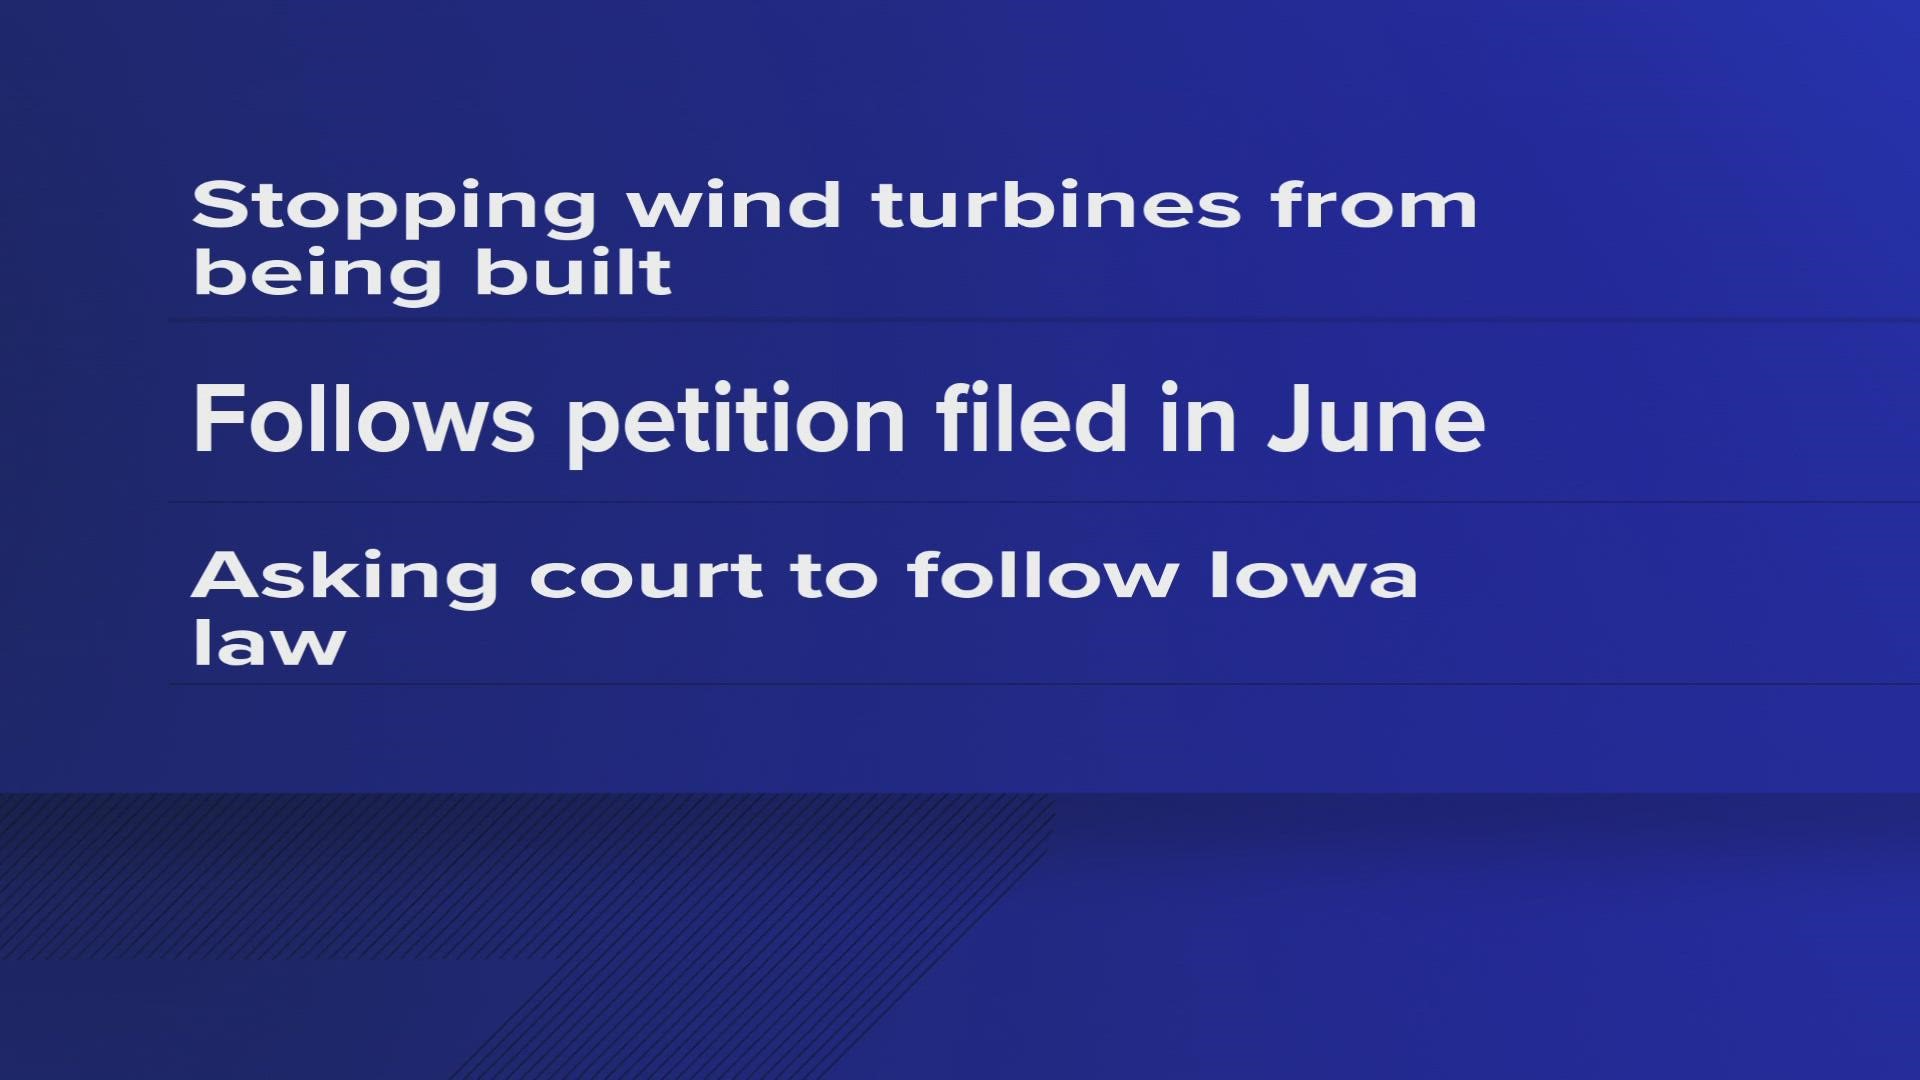 Richard Arp filed a lawsuit against the Board of Supervisors’ action reaffirming an outdated commercial wind energy ordinance in Tama County.